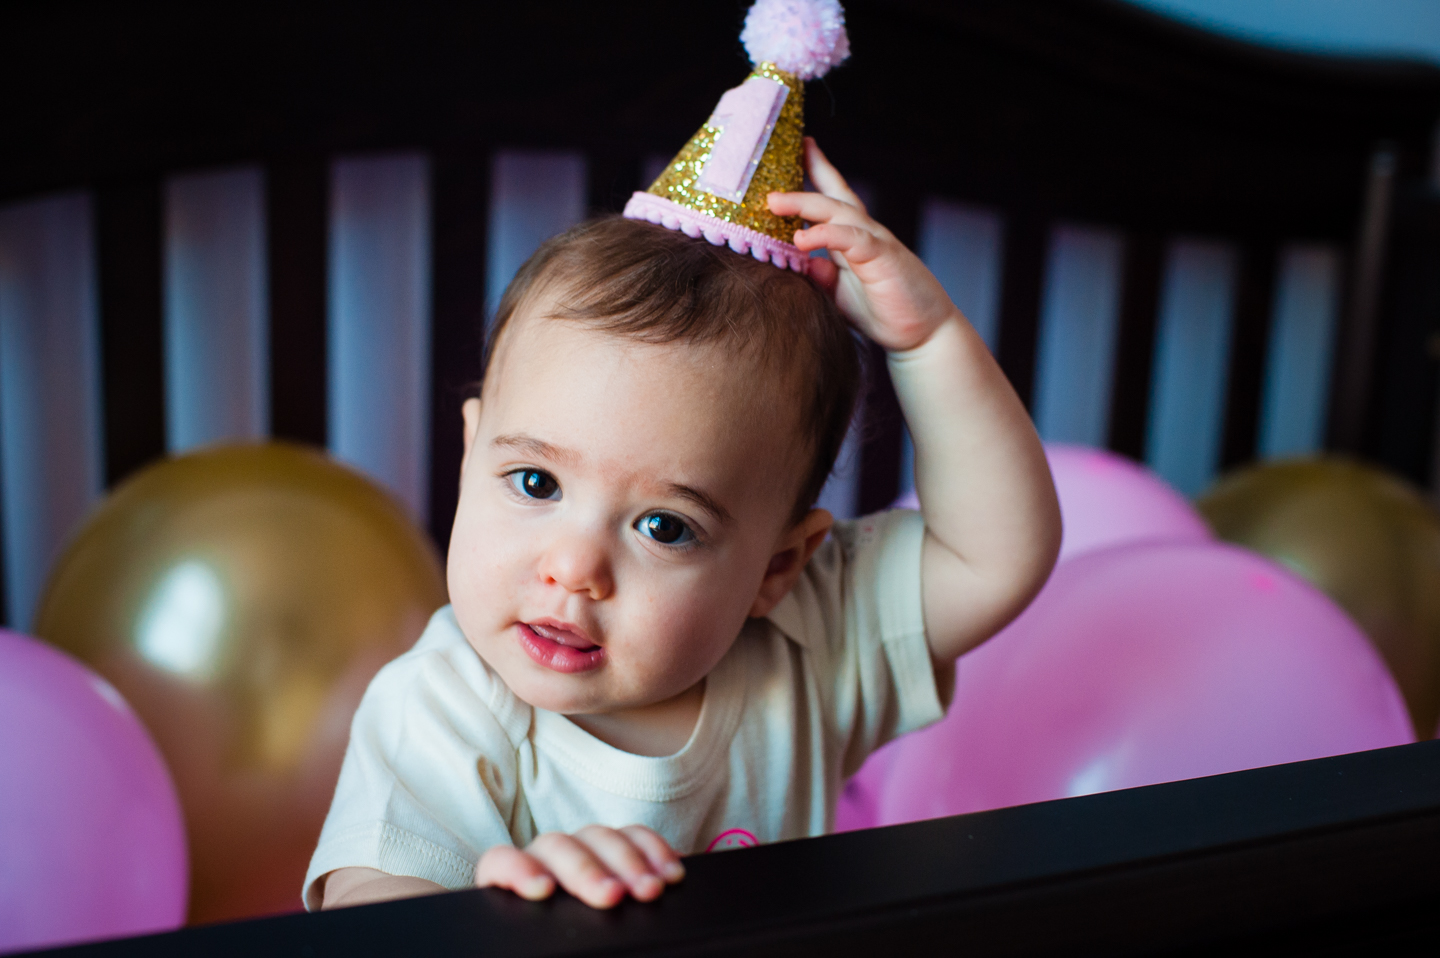 Cute 1 year old girl trying to pull her crown off her head